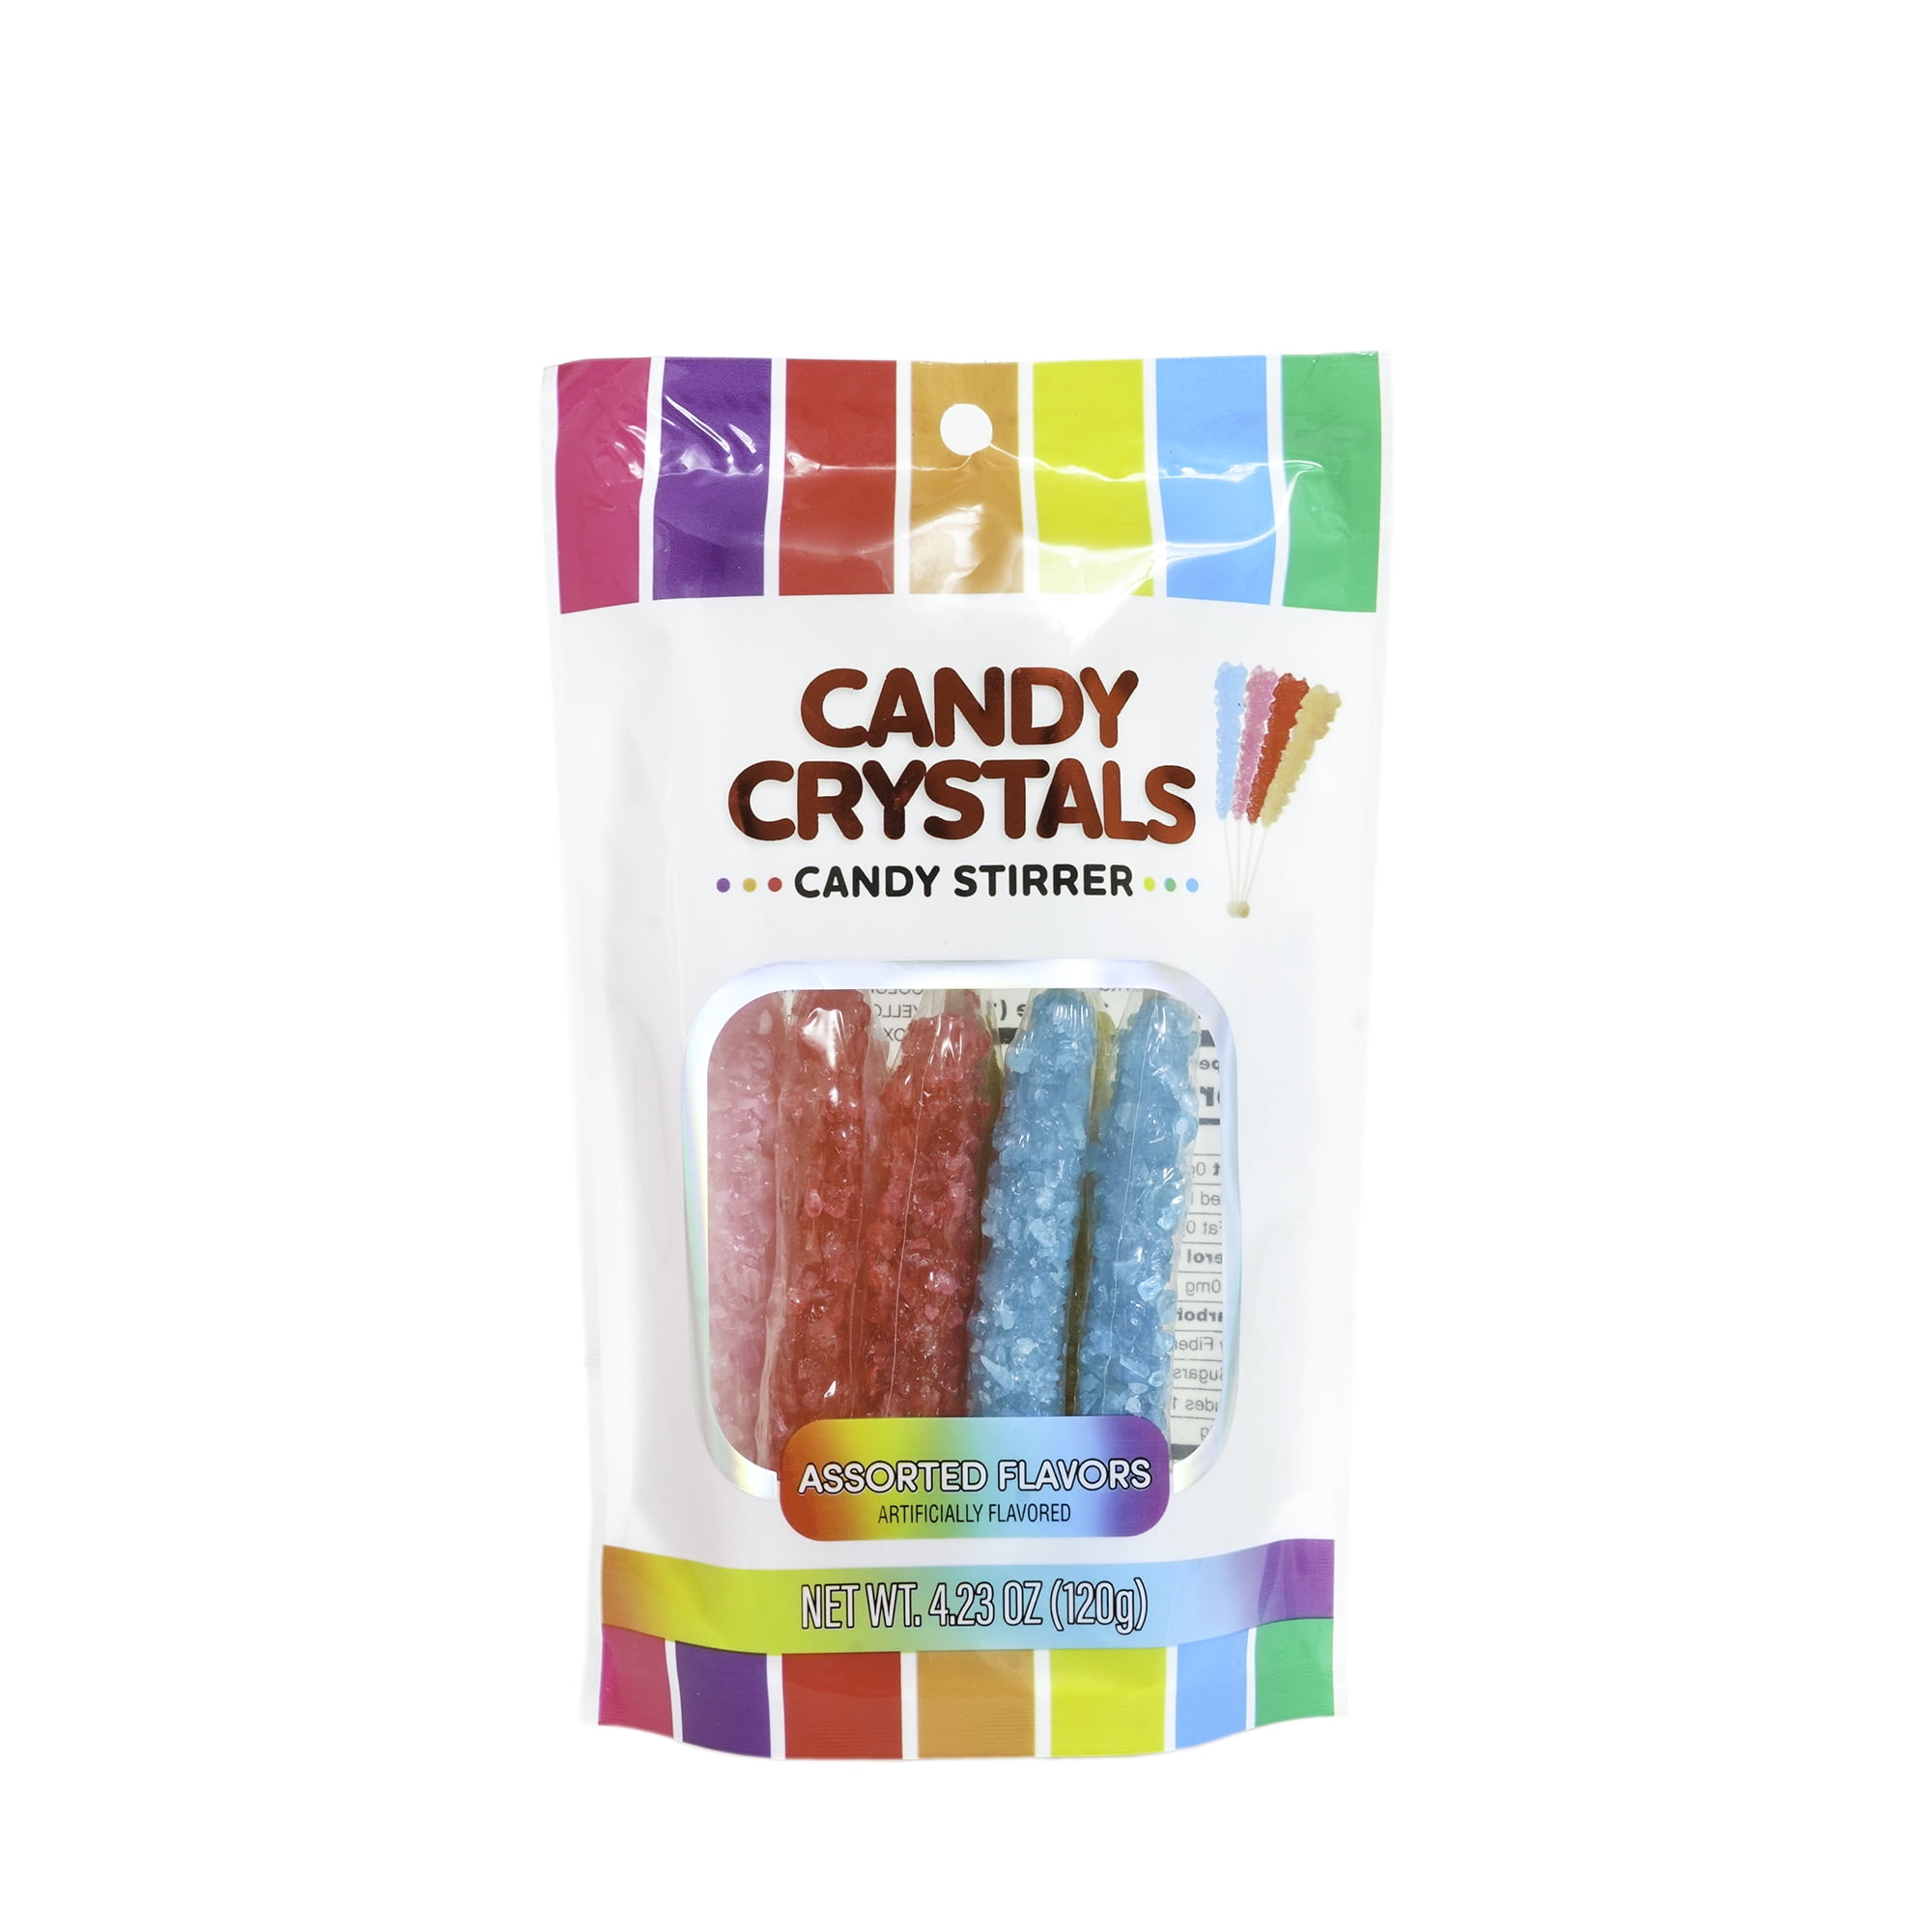 Hilco Candy Crystals Assorted Flavors Rainbow Candy Stirrers, 4.23 oz, 8 Pack